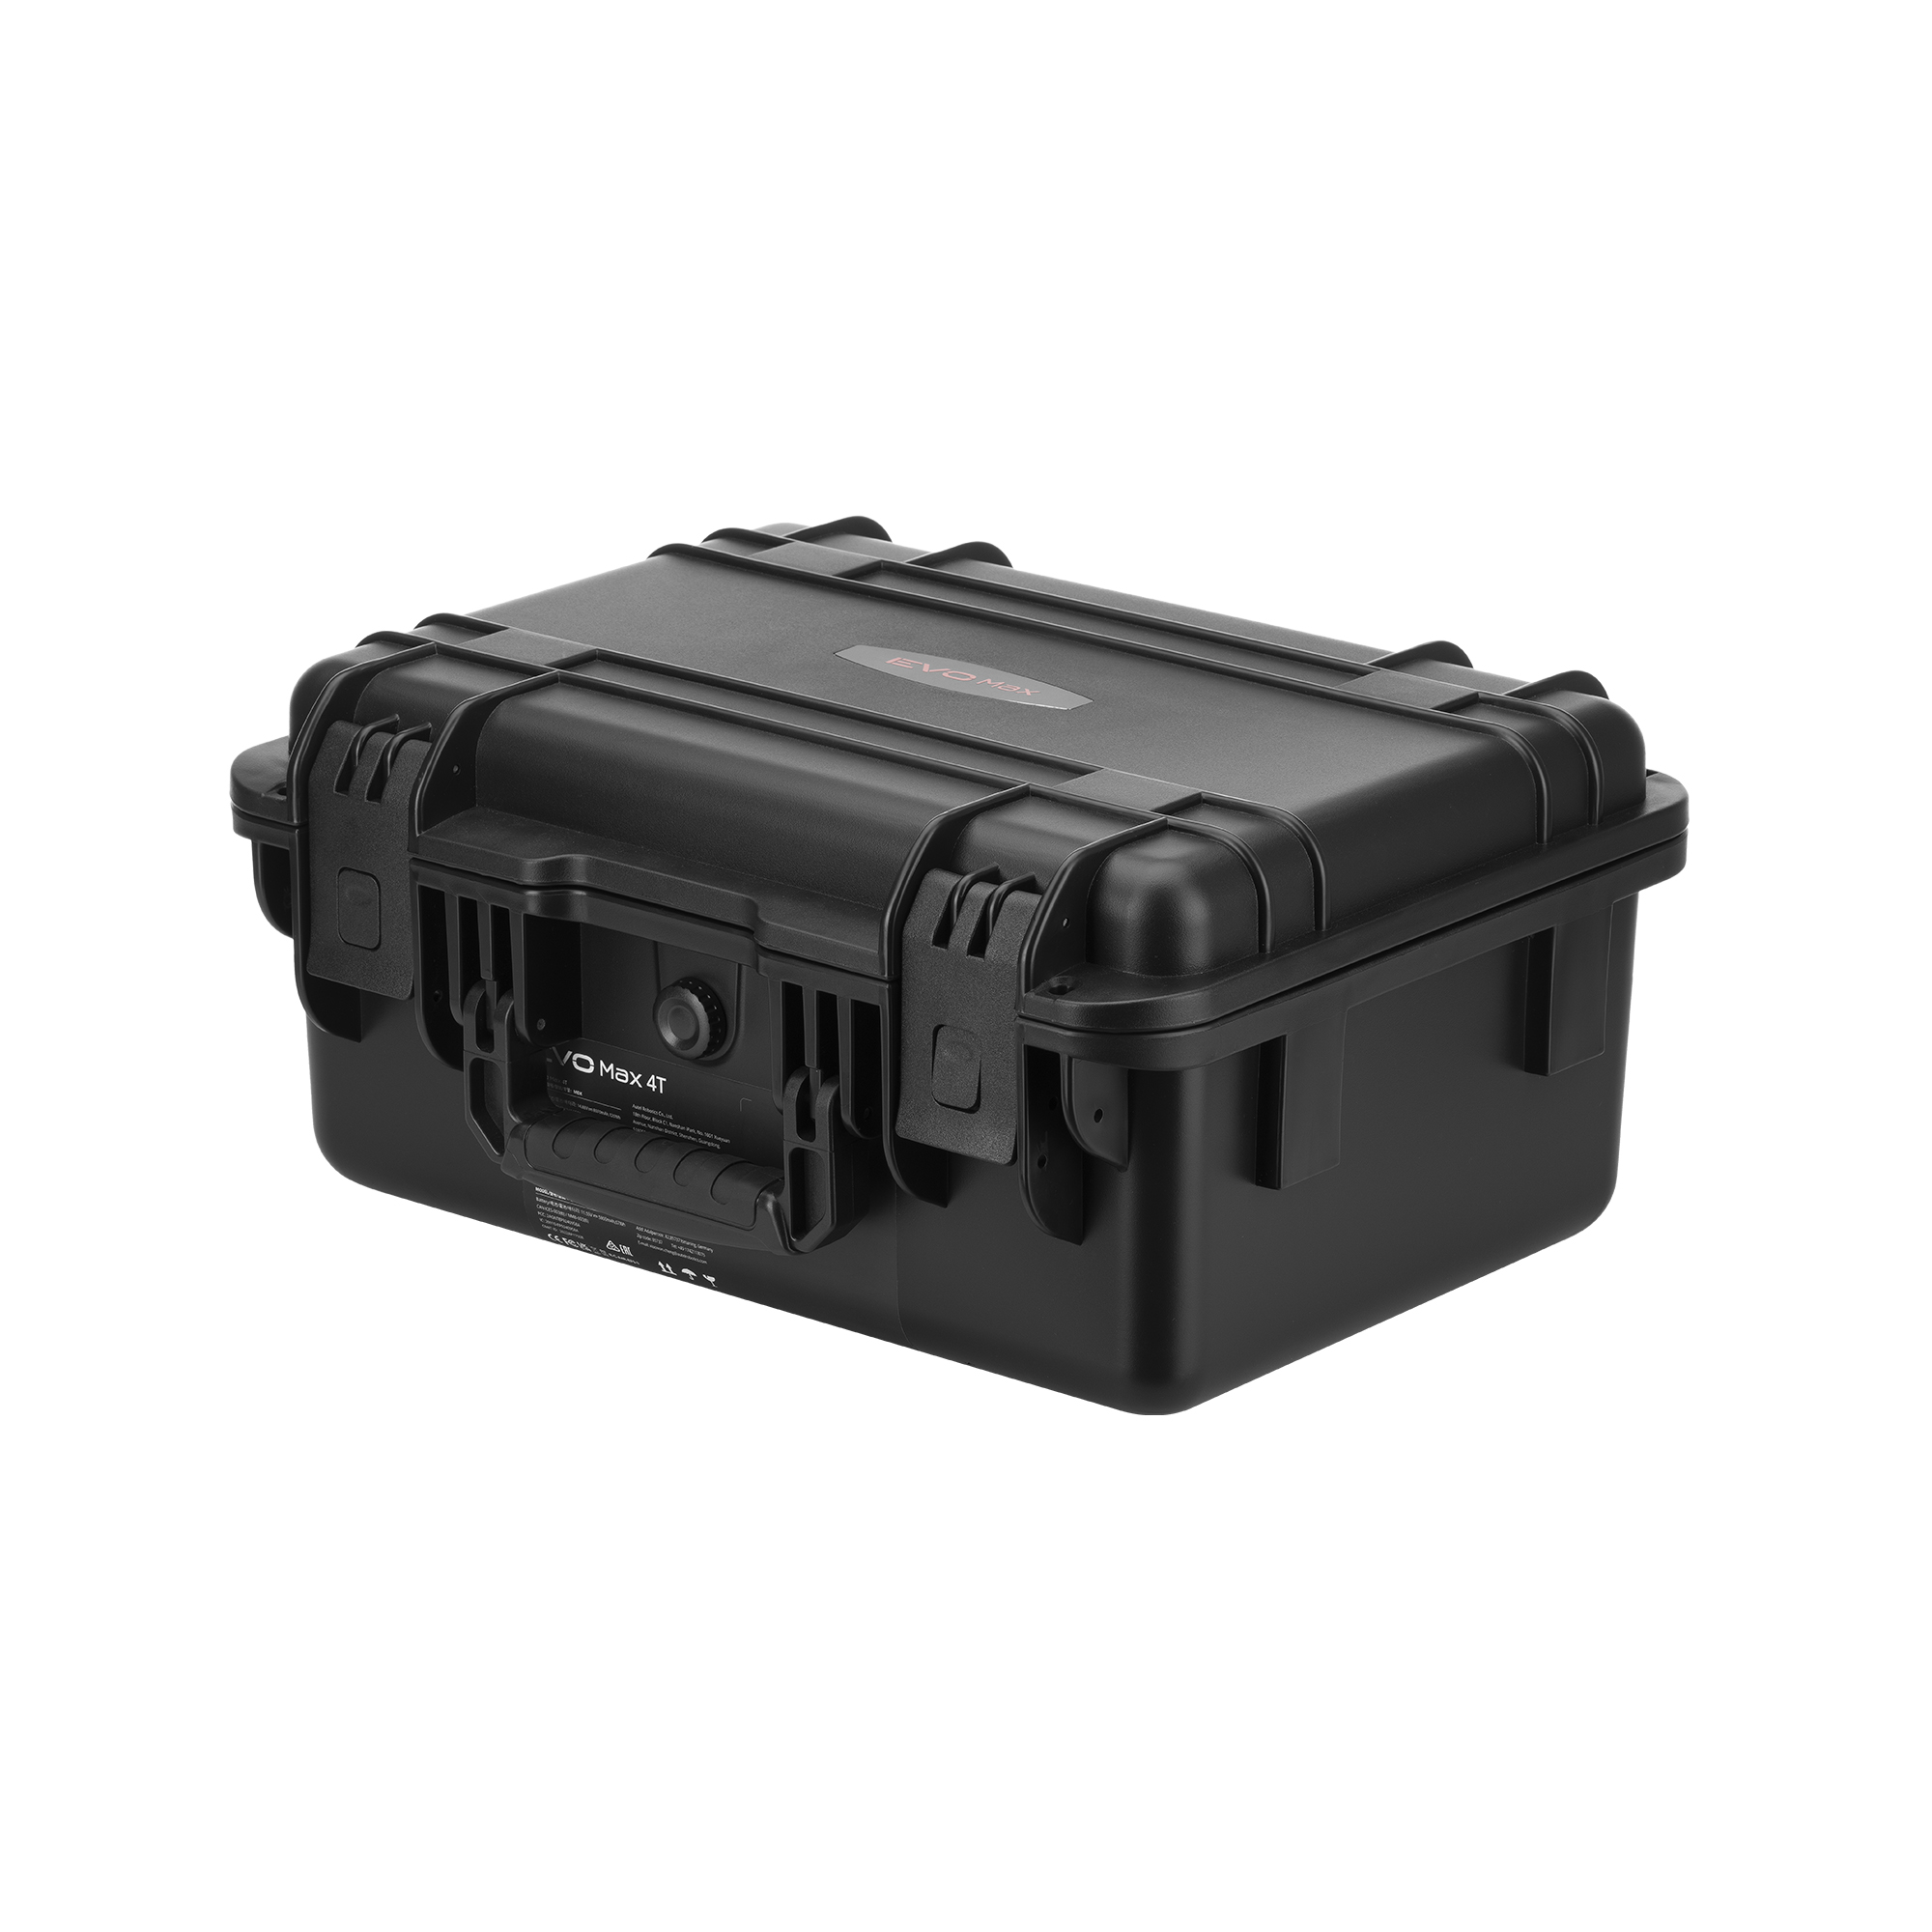 EVO Max 4T_Rugged Case_Battery Together_Outside_002